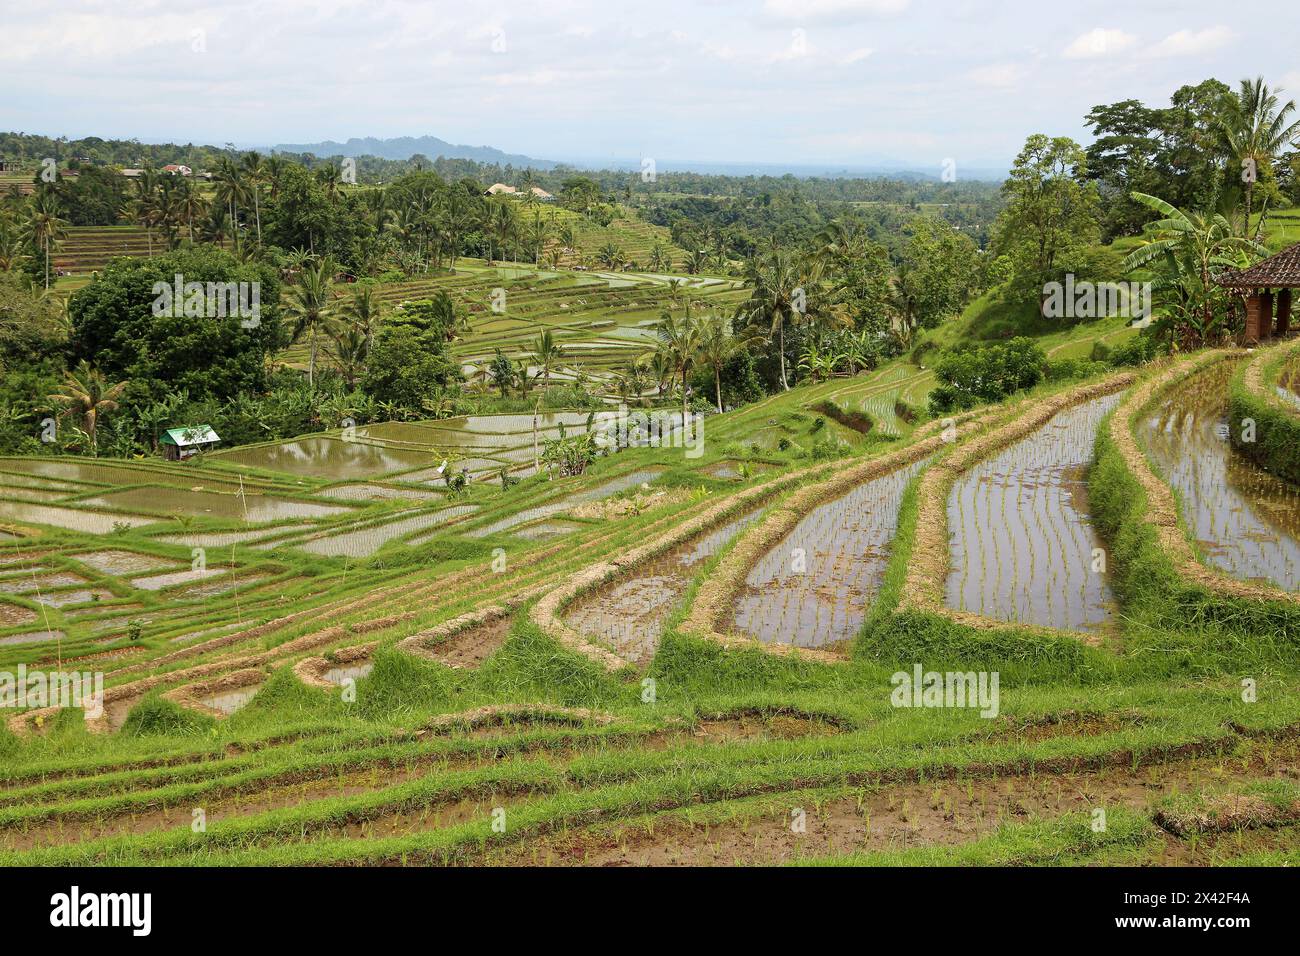 The valley with rice terraces - Jatiluwih Rice terraces, Bali, Indonesia Stock Photo